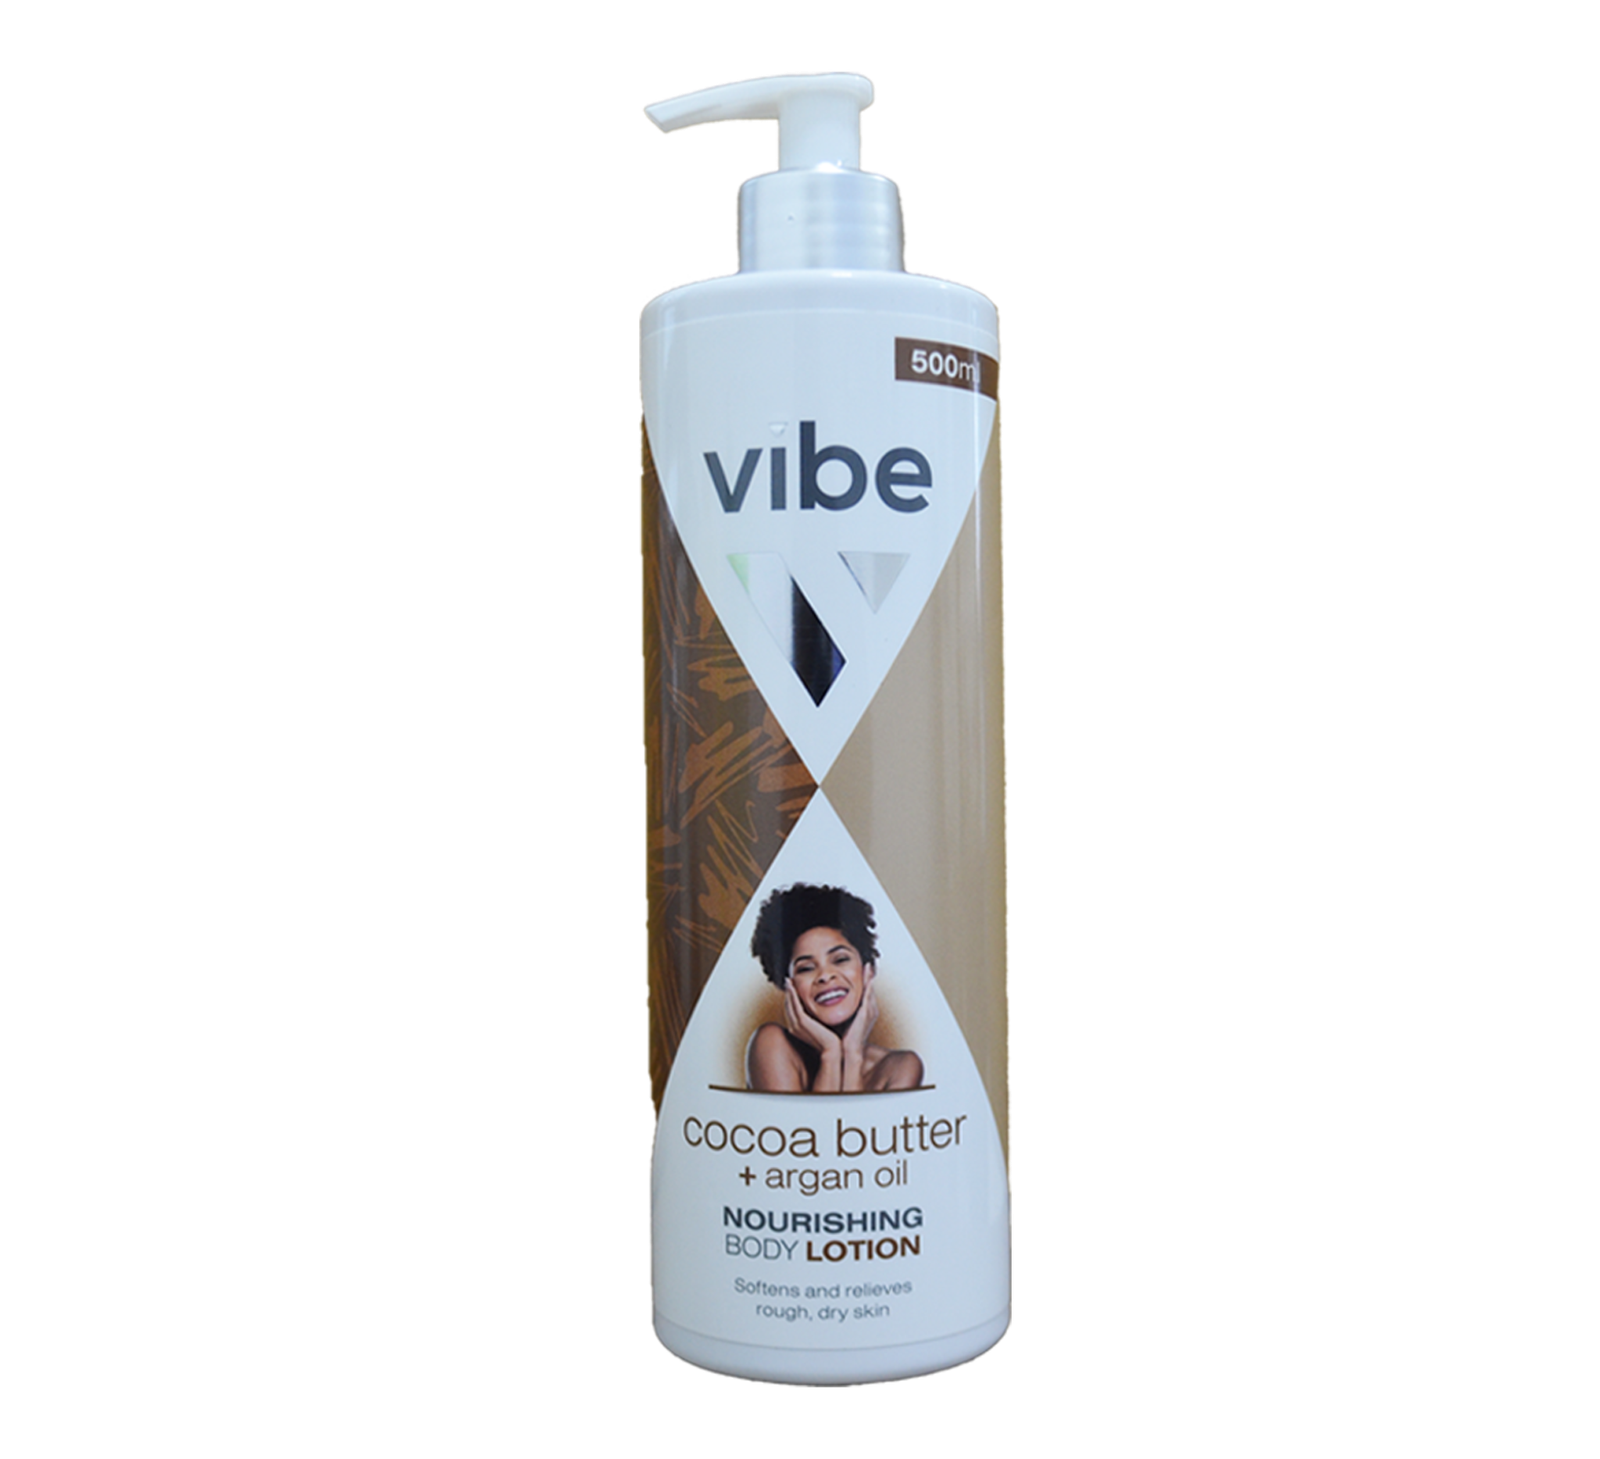 Vibe Body Lotion 500ml - Cocoa Butter